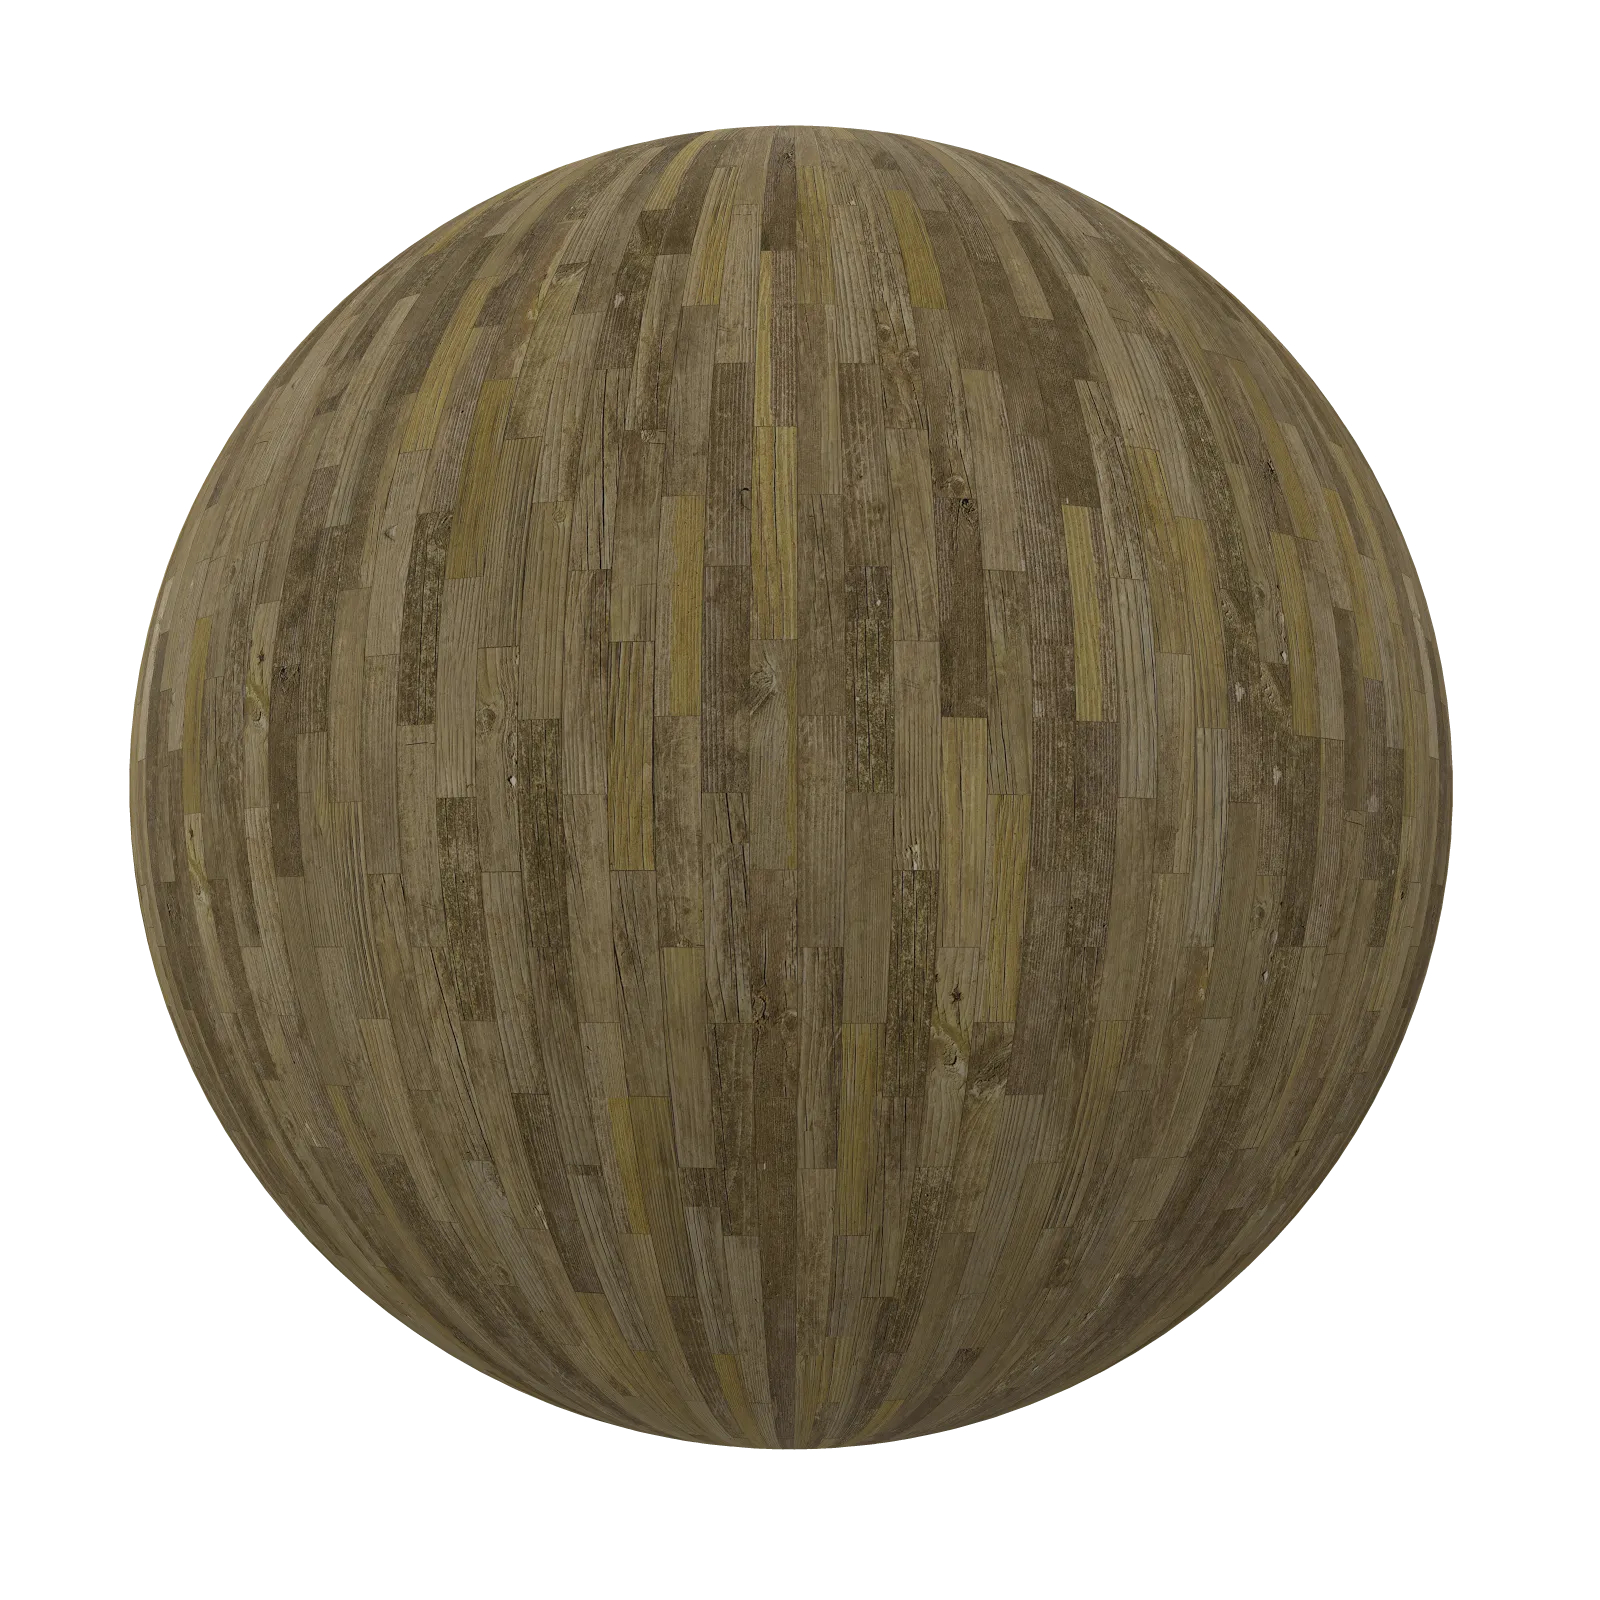 TEXTURES – WOOD – Old Wood Tiles 25